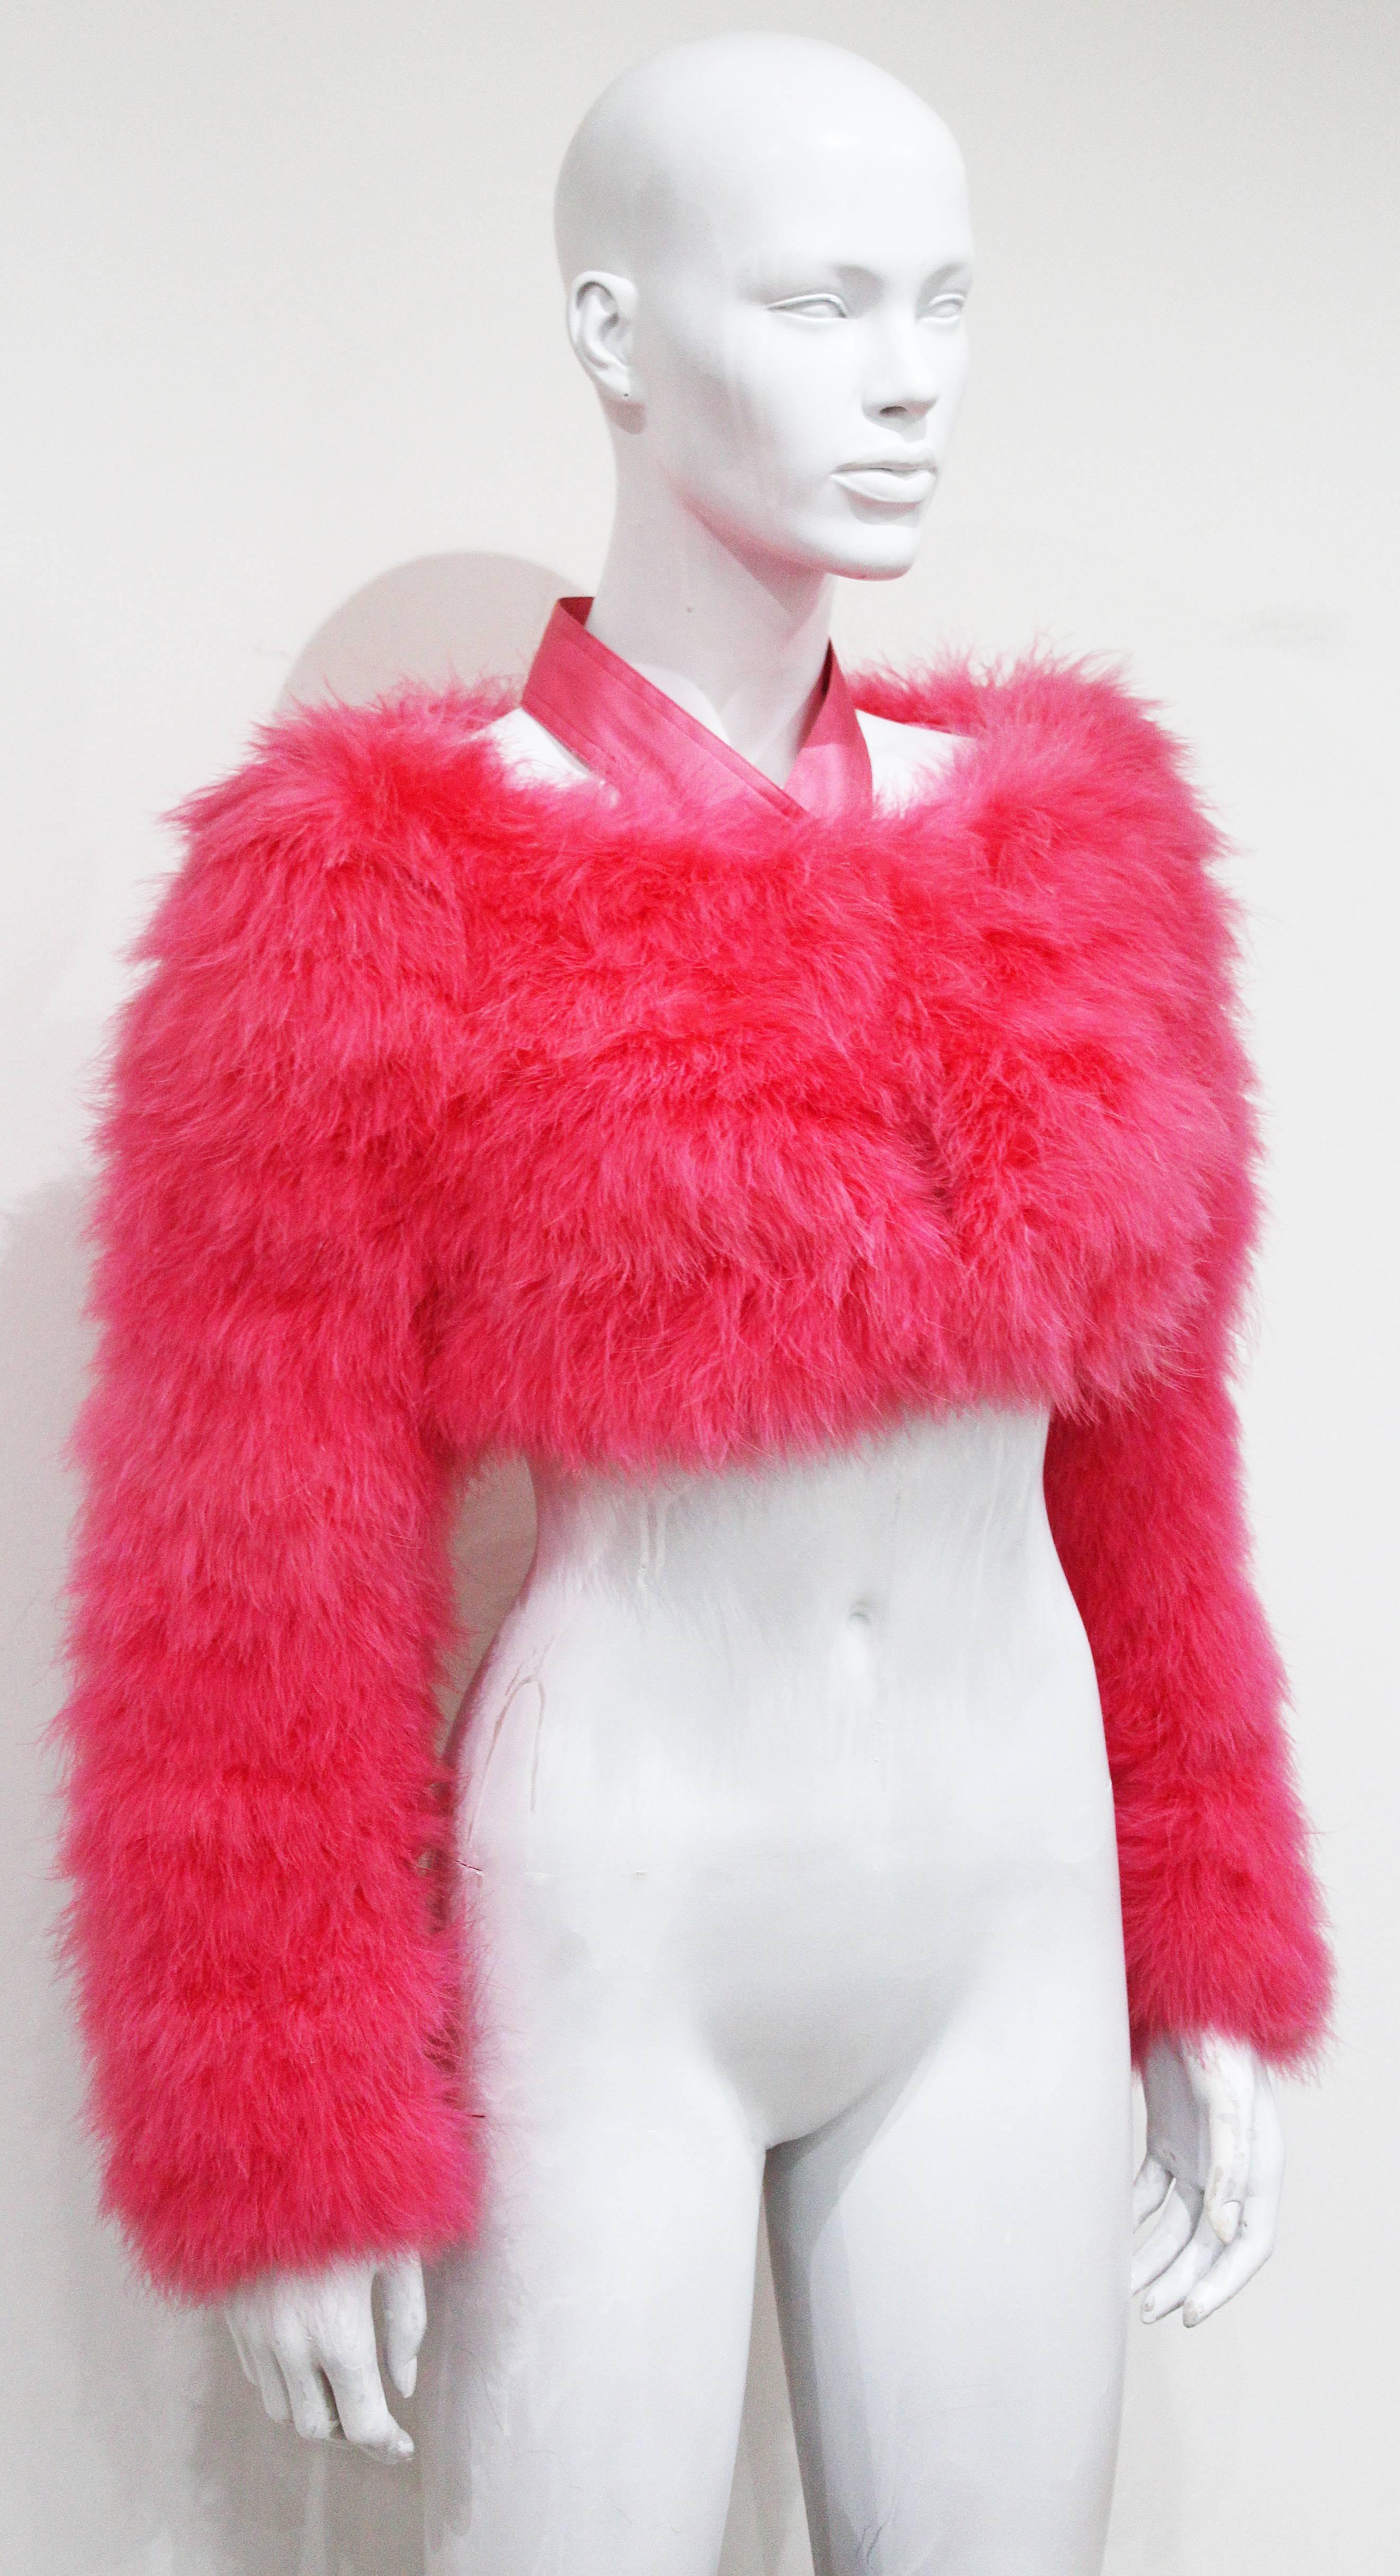 A marabou fur bolero in hot pink from the Spring/Summer 2004 runway collection. The bolero was designed by Tom Ford for Gucci. 100% silk halter neck design and lining. 

Size: French 38 / Italian 42